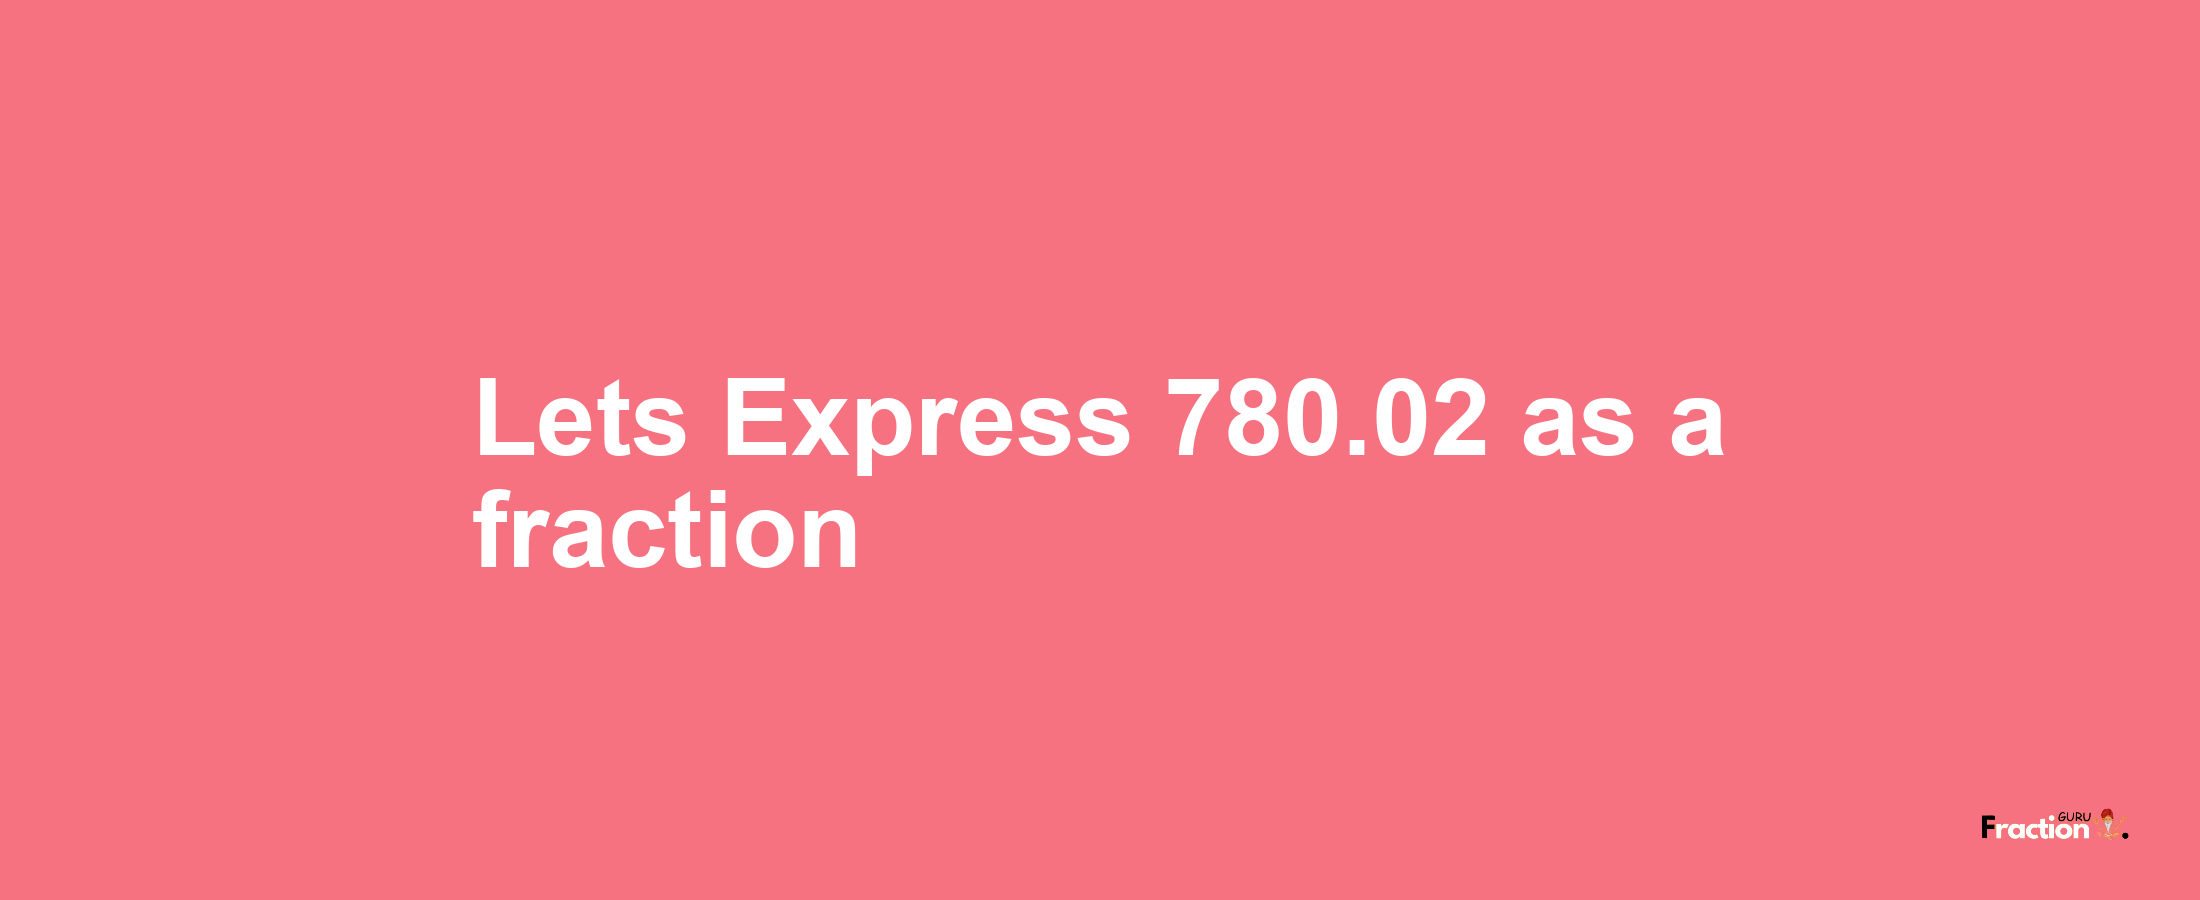 Lets Express 780.02 as afraction